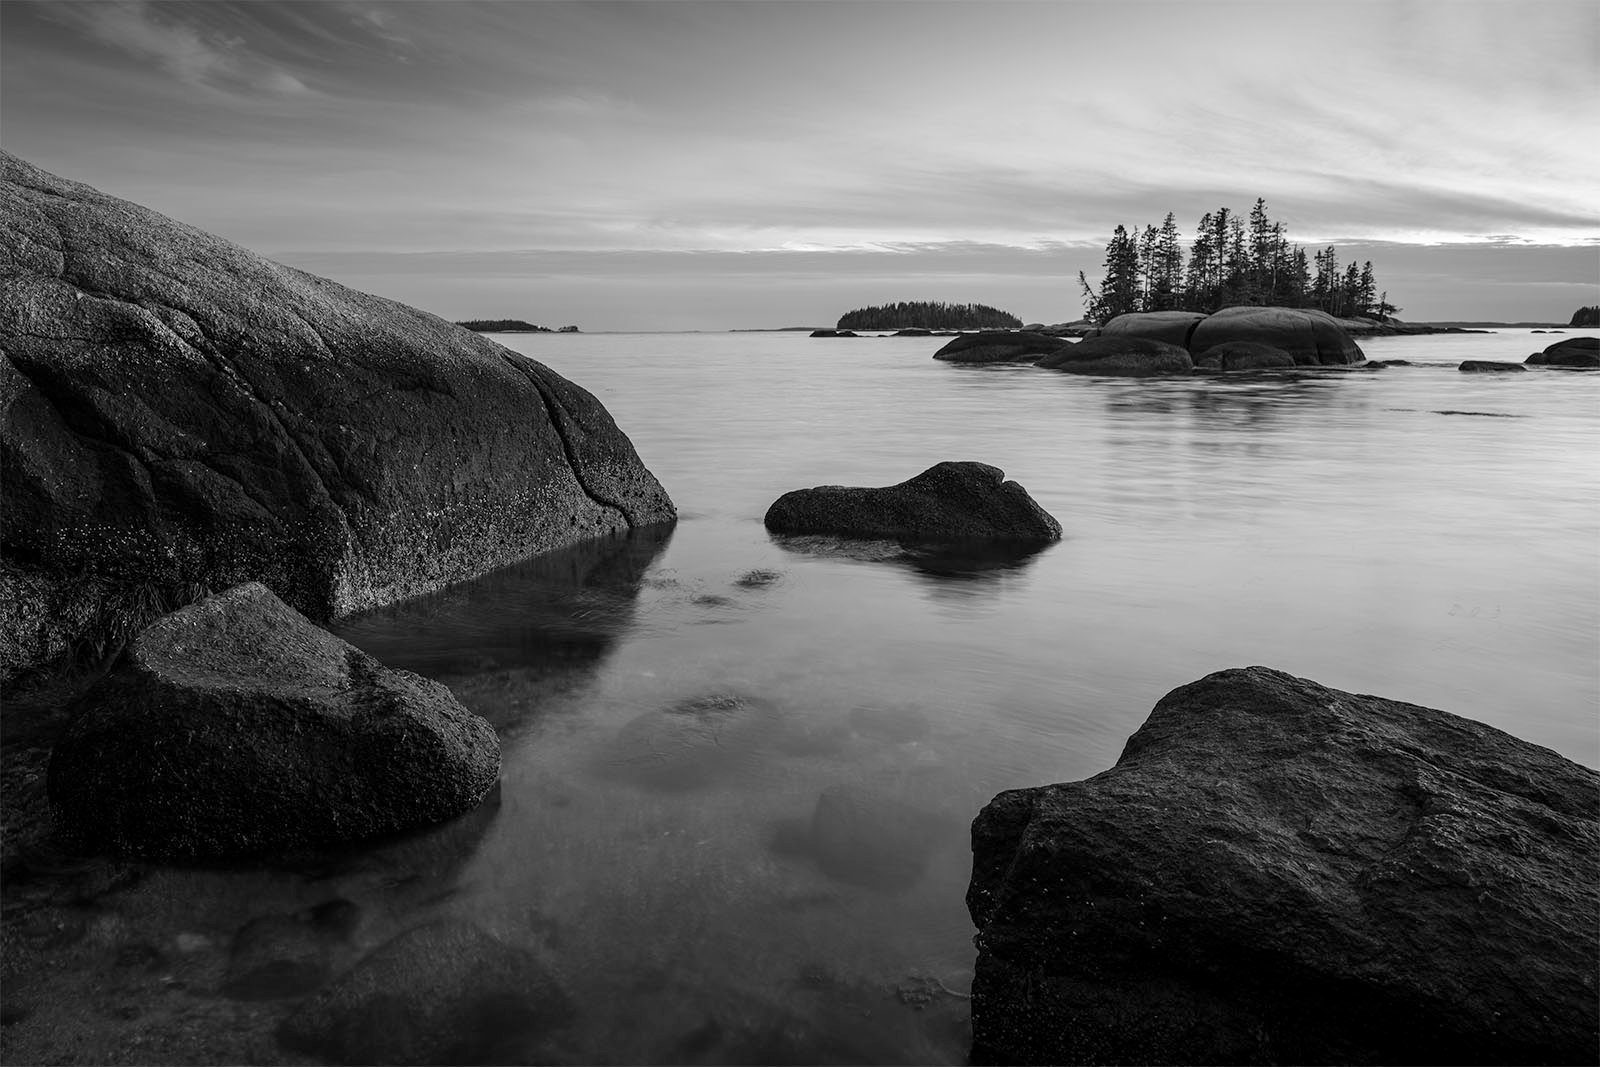 A black and white photo of a serene lake with smooth water, featuring large rocks in the foreground and a small, tree-covered island in the background under a cloudy sky.